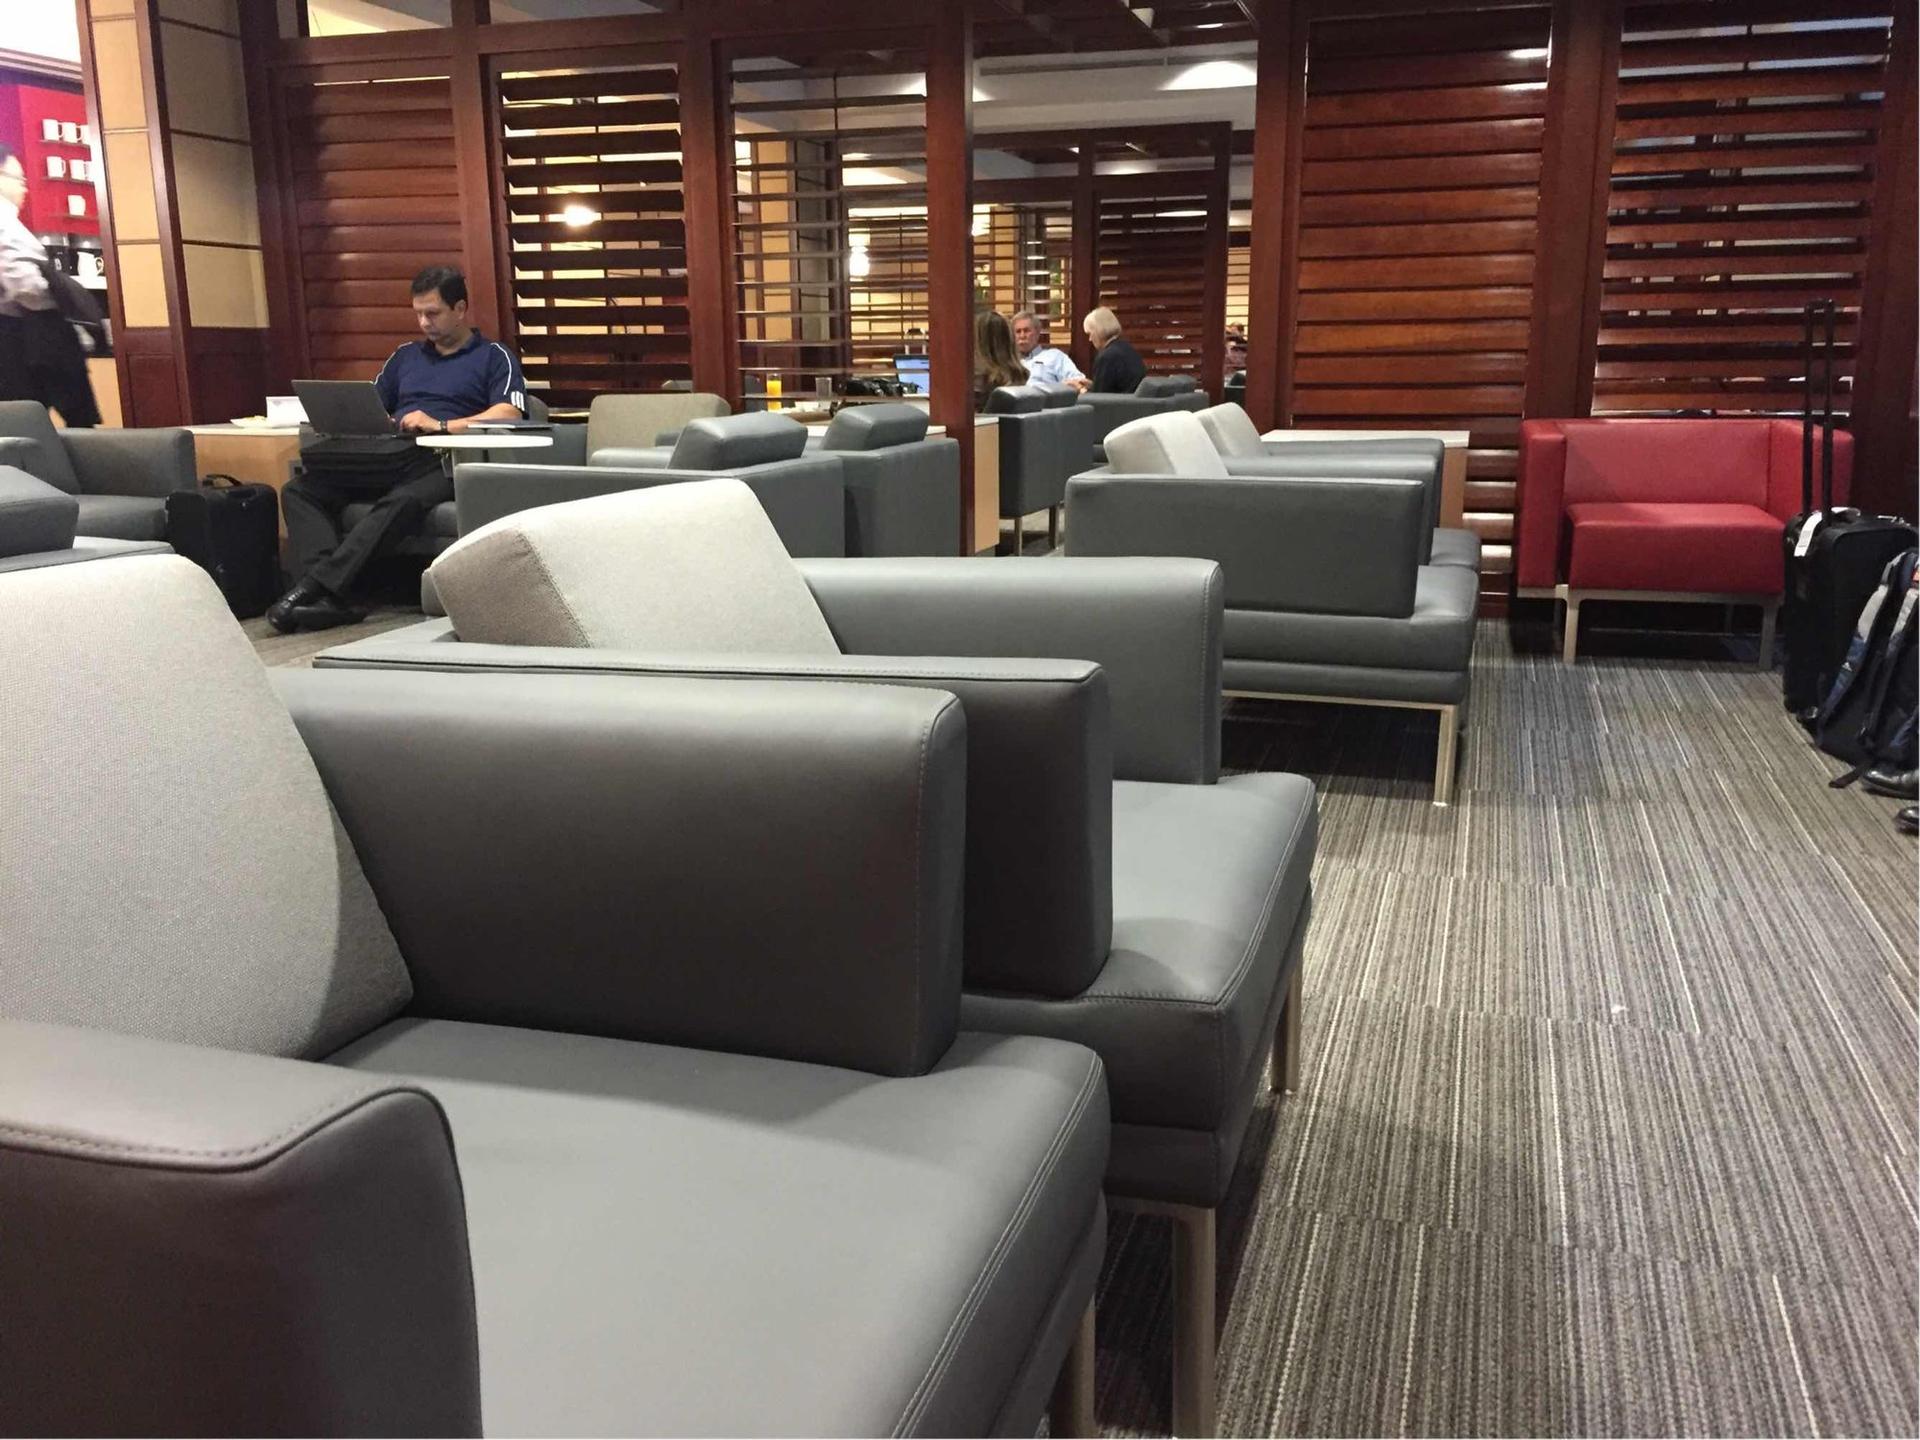 American Airlines Admirals Club image 9 of 32